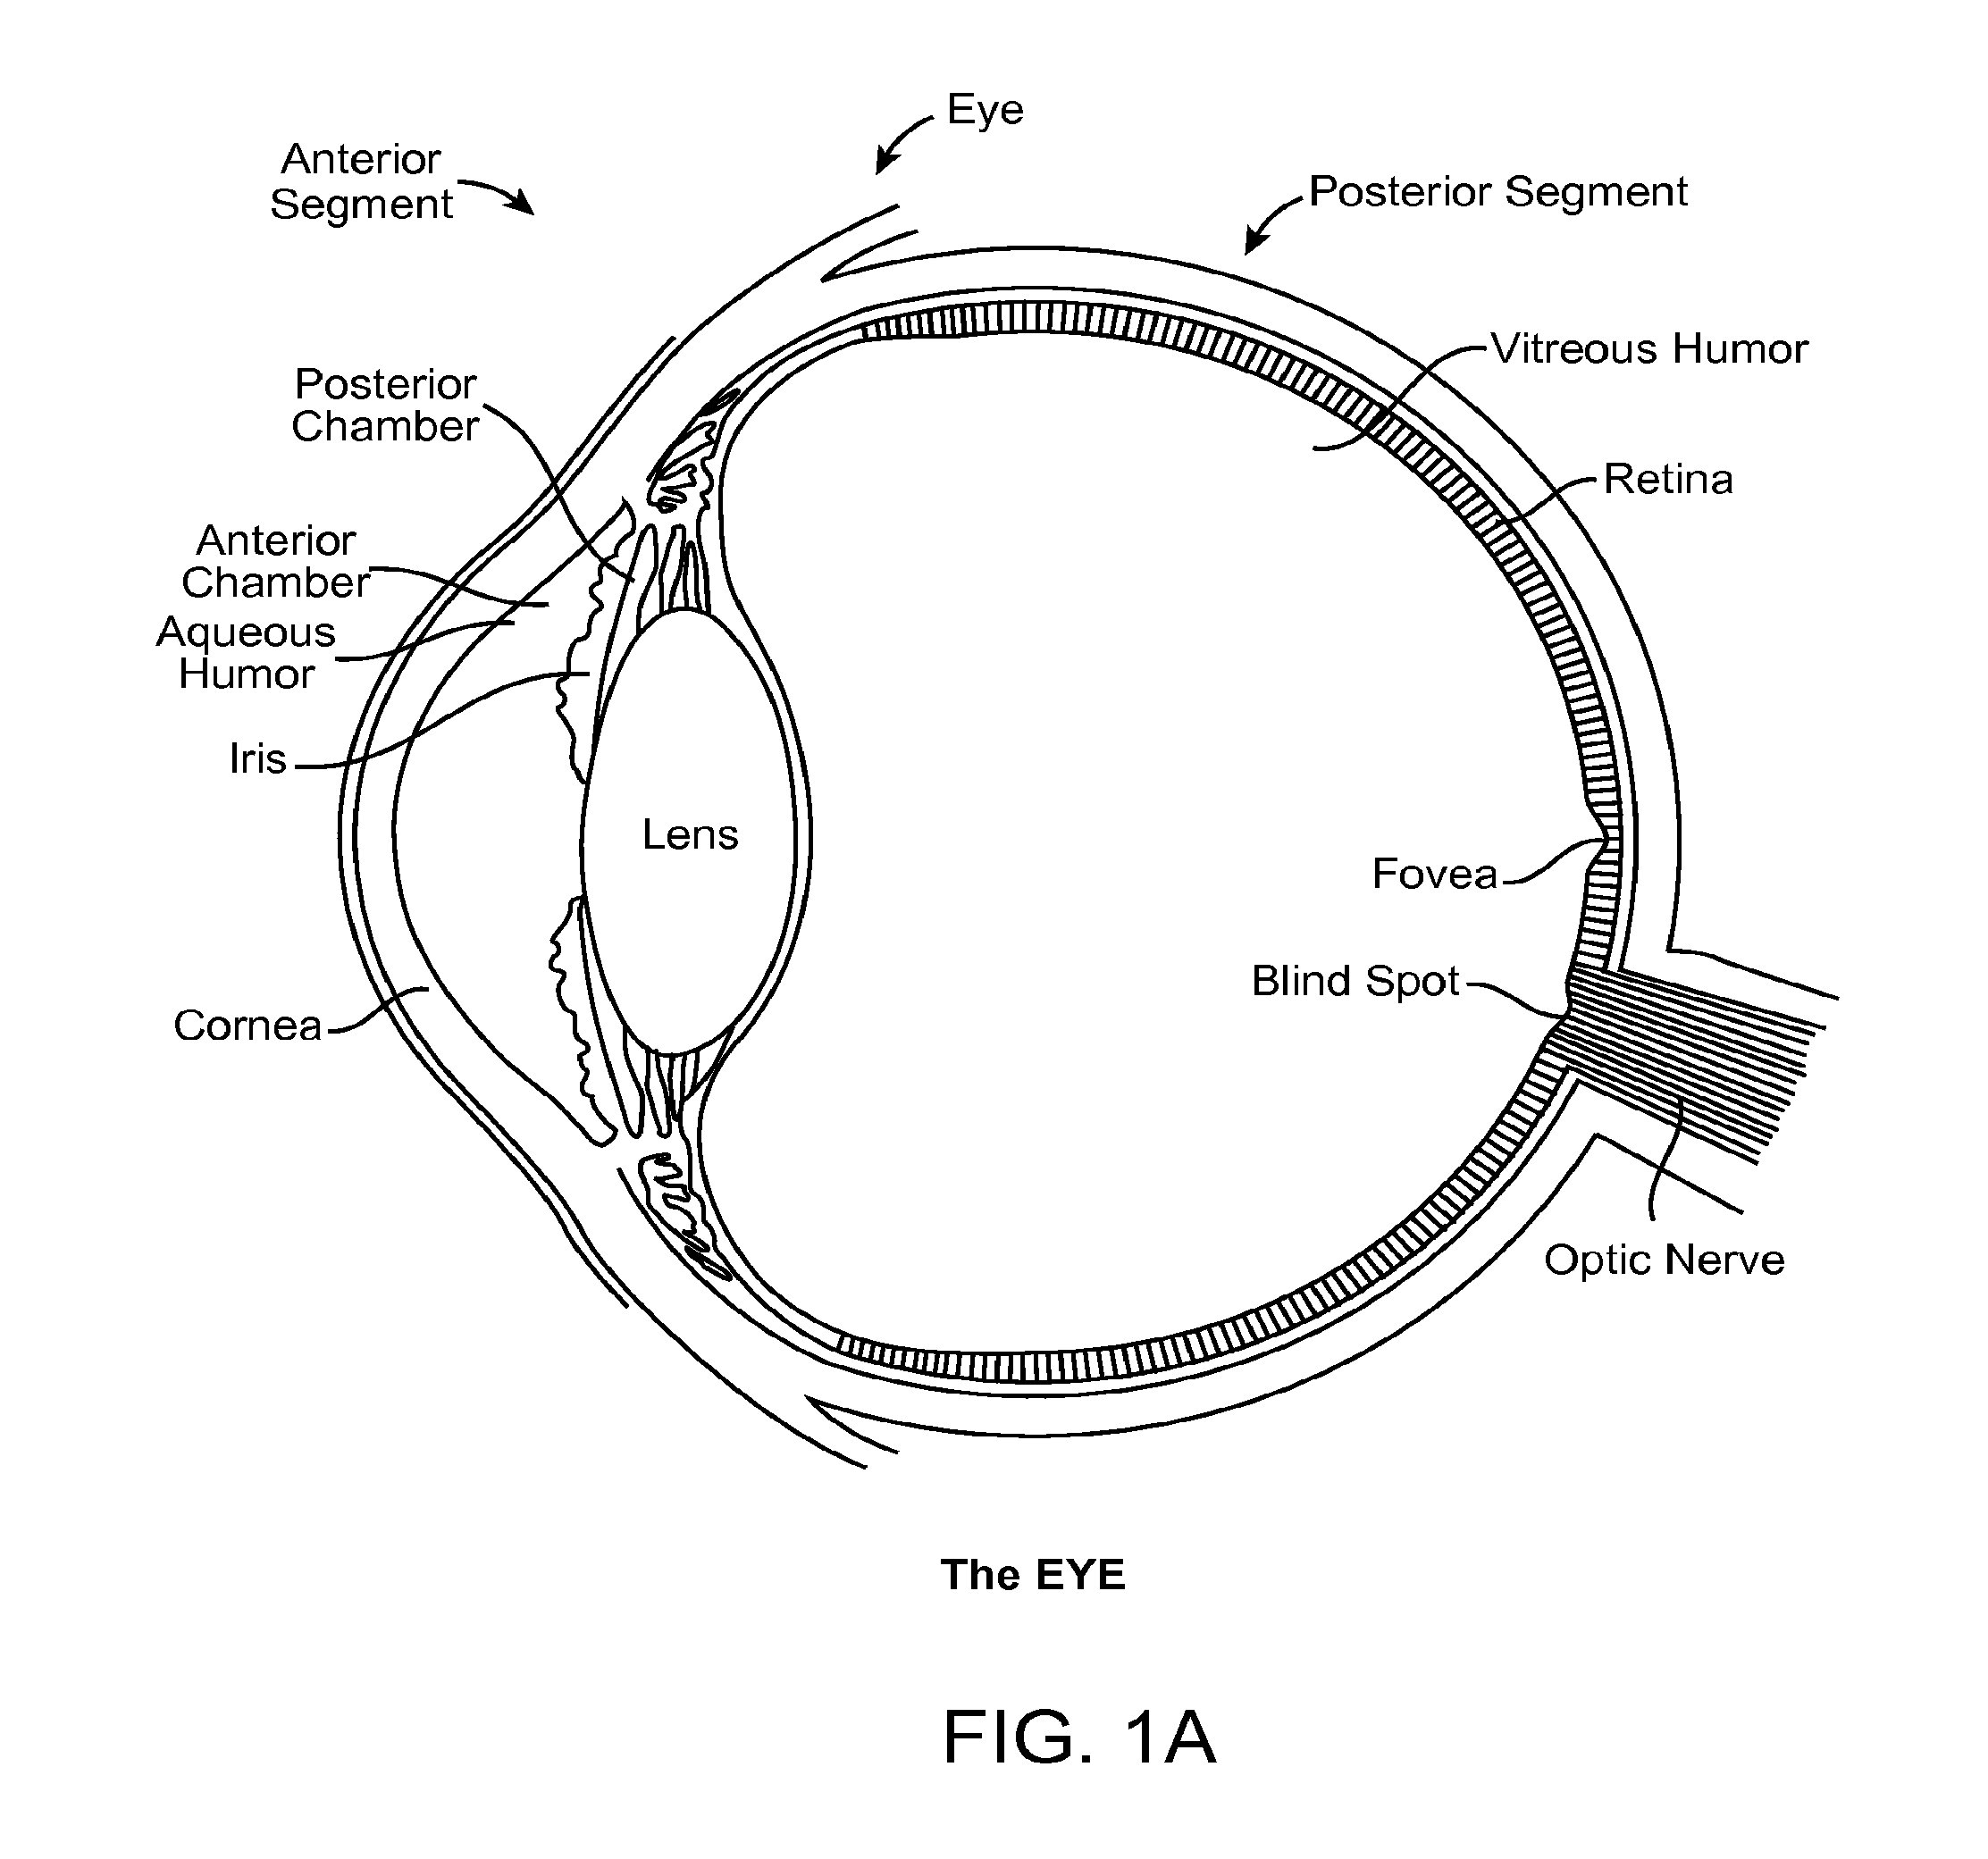 Implantable MEMS intraocular pressure sensor devices and methods for glaucoma monitoring